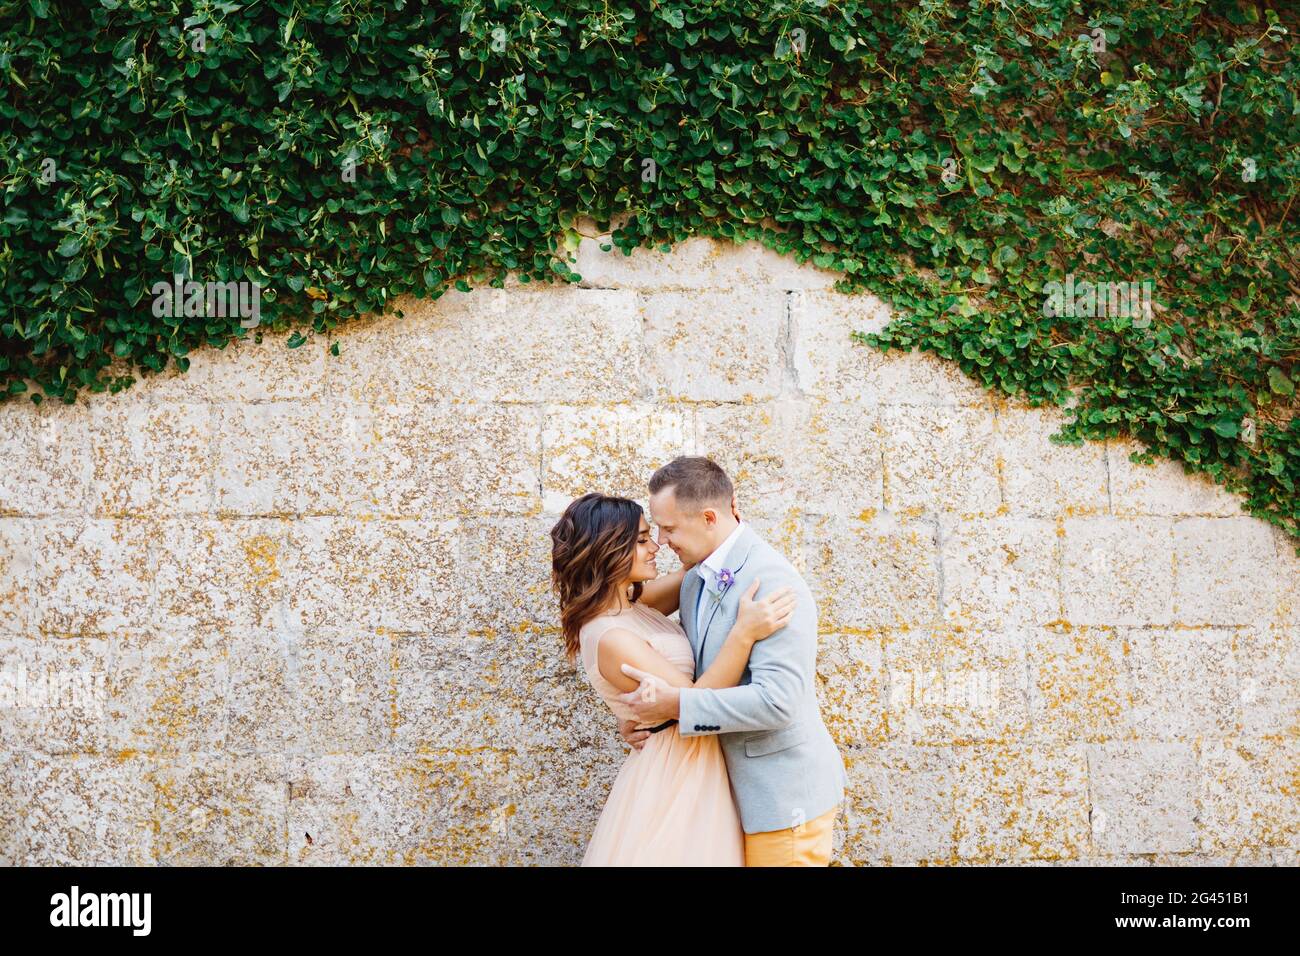 Groom kisses bride tenderly embracing her against the background of a stone wall entwined with green ivy Stock Photo